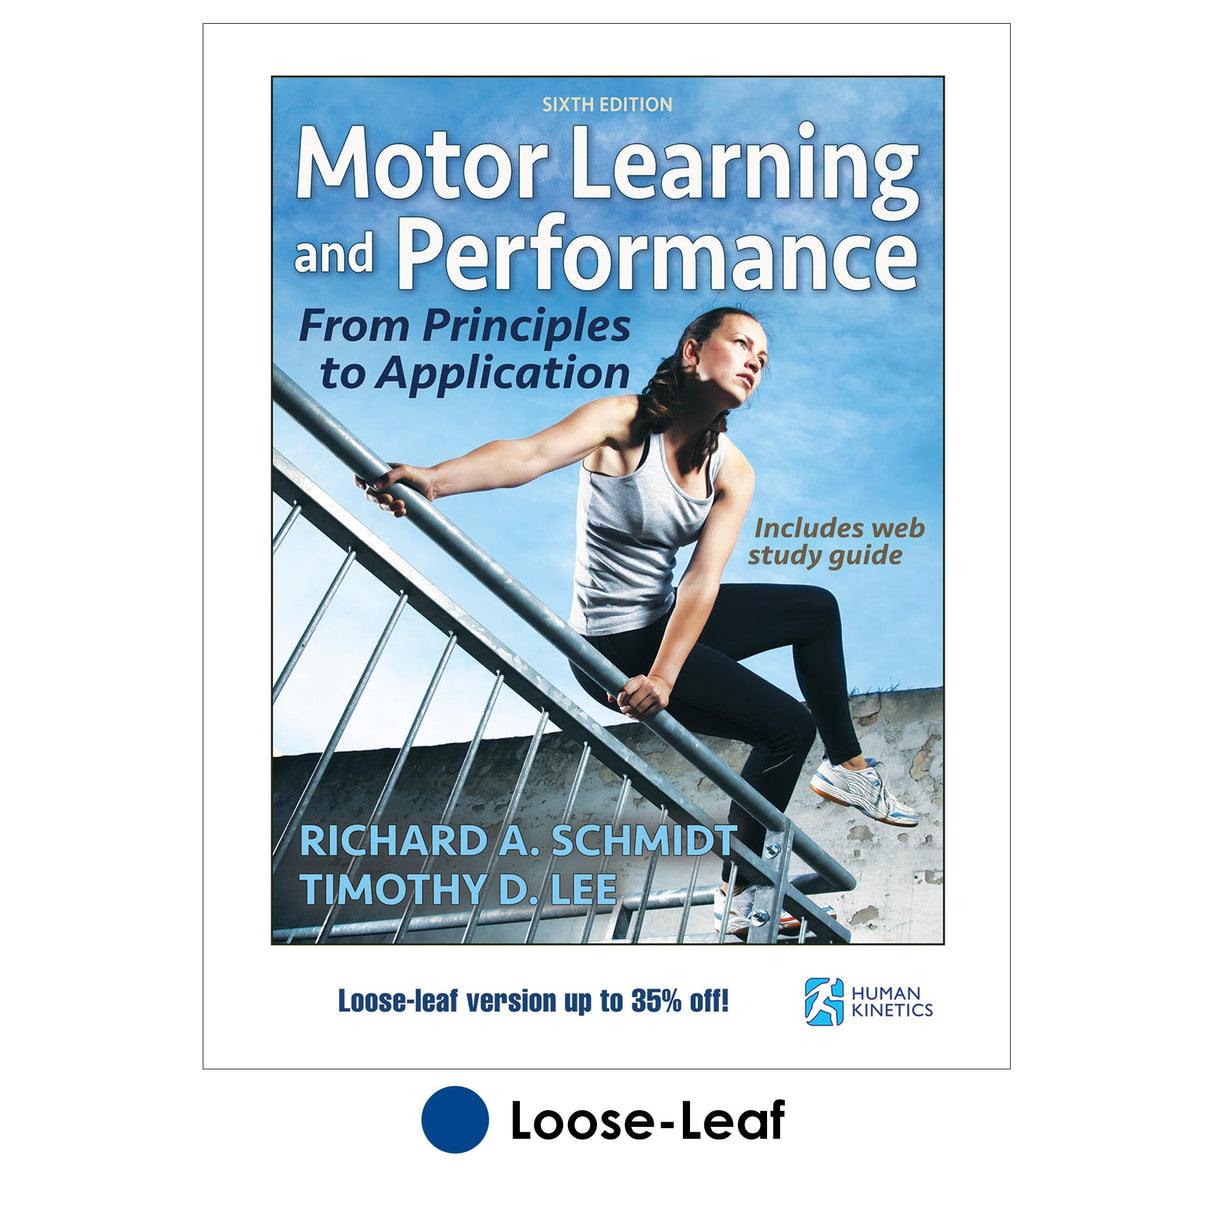 Motor Learning and Performance 6th Edition With Web Study Guide-Loose-Leaf Edition